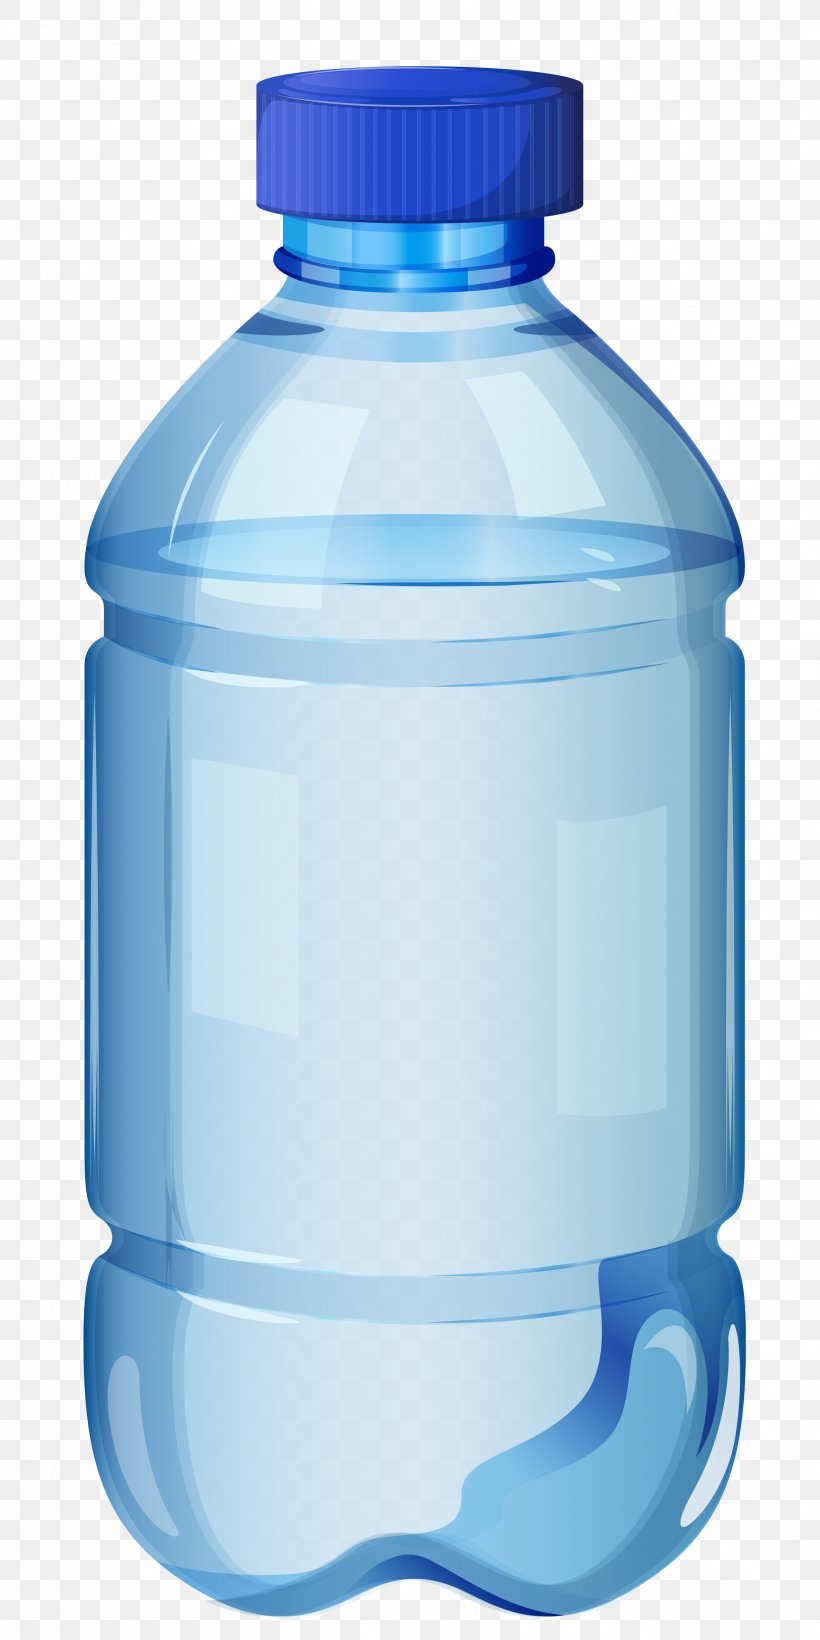 Bottled Water Water Bottles Clip Art, PNG, 2376x4752px, Bottled Water, Bottle, Bottle Cap, Cylinder, Distilled Water Download Free